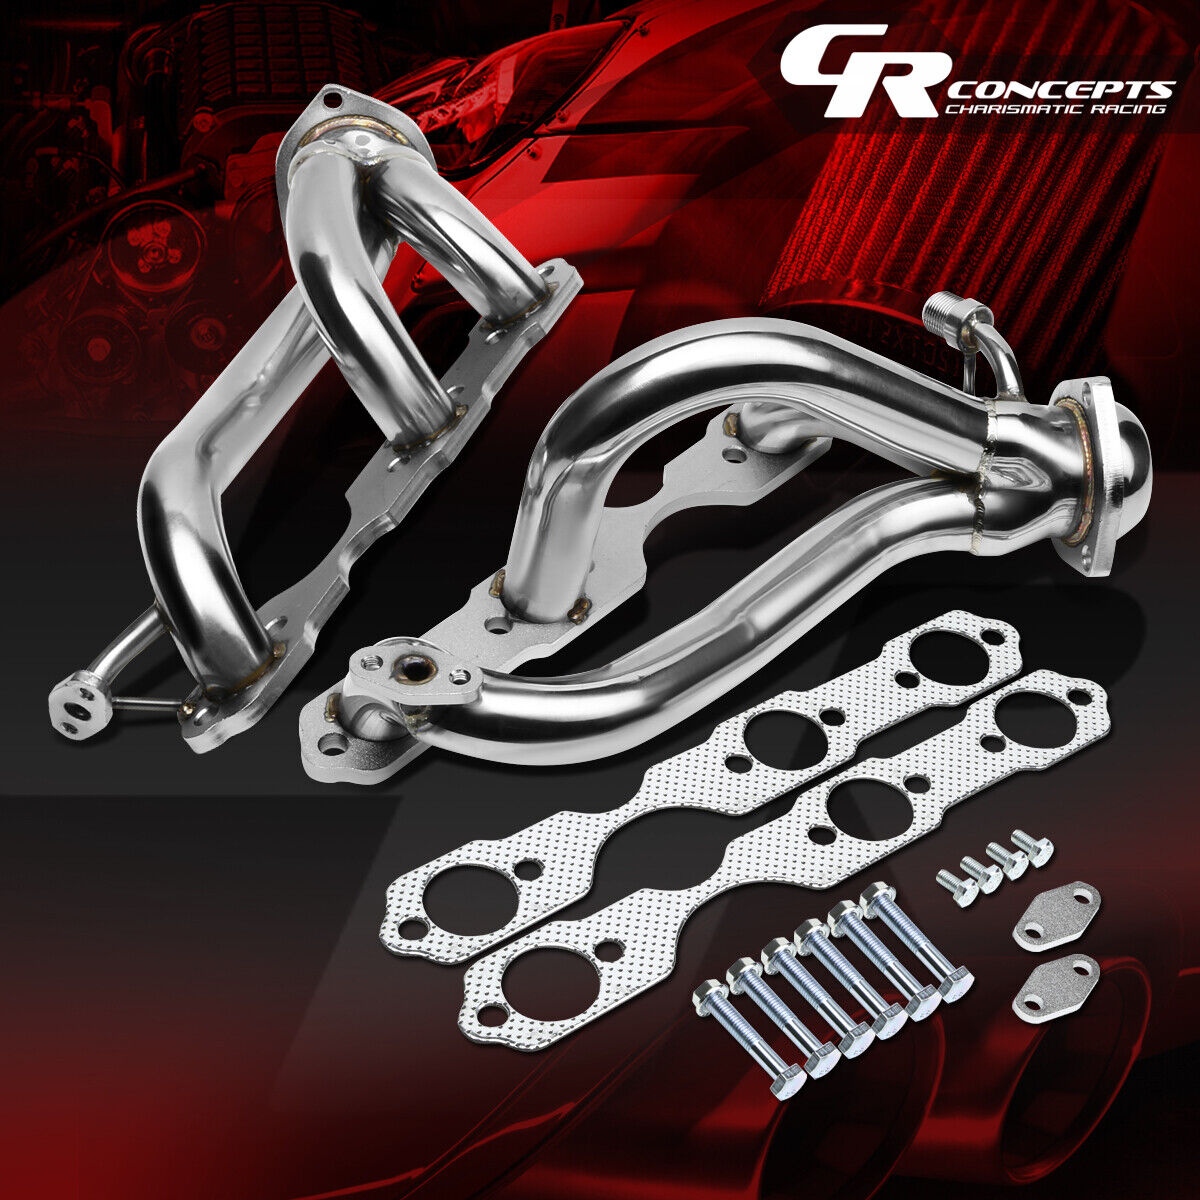 FOR 96-01 S10/BLAZER/SONOMA/JIMMY 4.3 V6 STAINLESS EXHAUST MANIFOLD HEADER+BOLTS